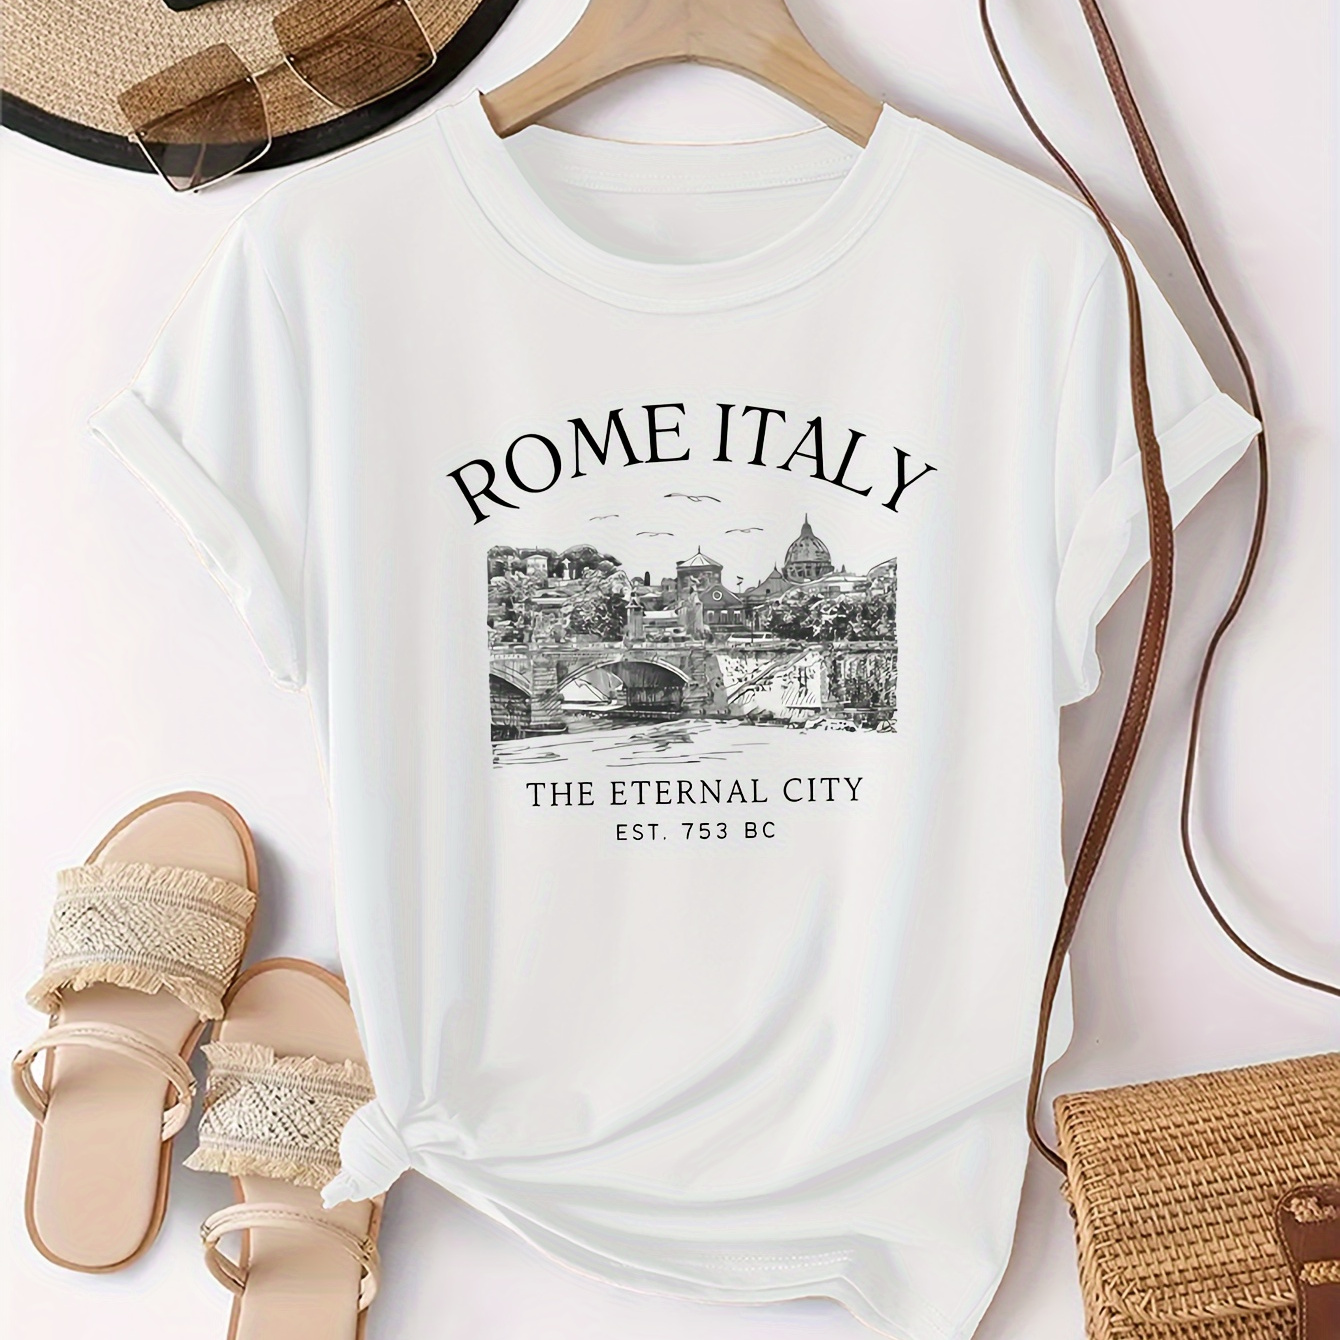 

Letter & Beautiful Roman Print T-shirt, Short Sleeve Crew Neck Casual Top For Summer & Spring, Women's Clothing